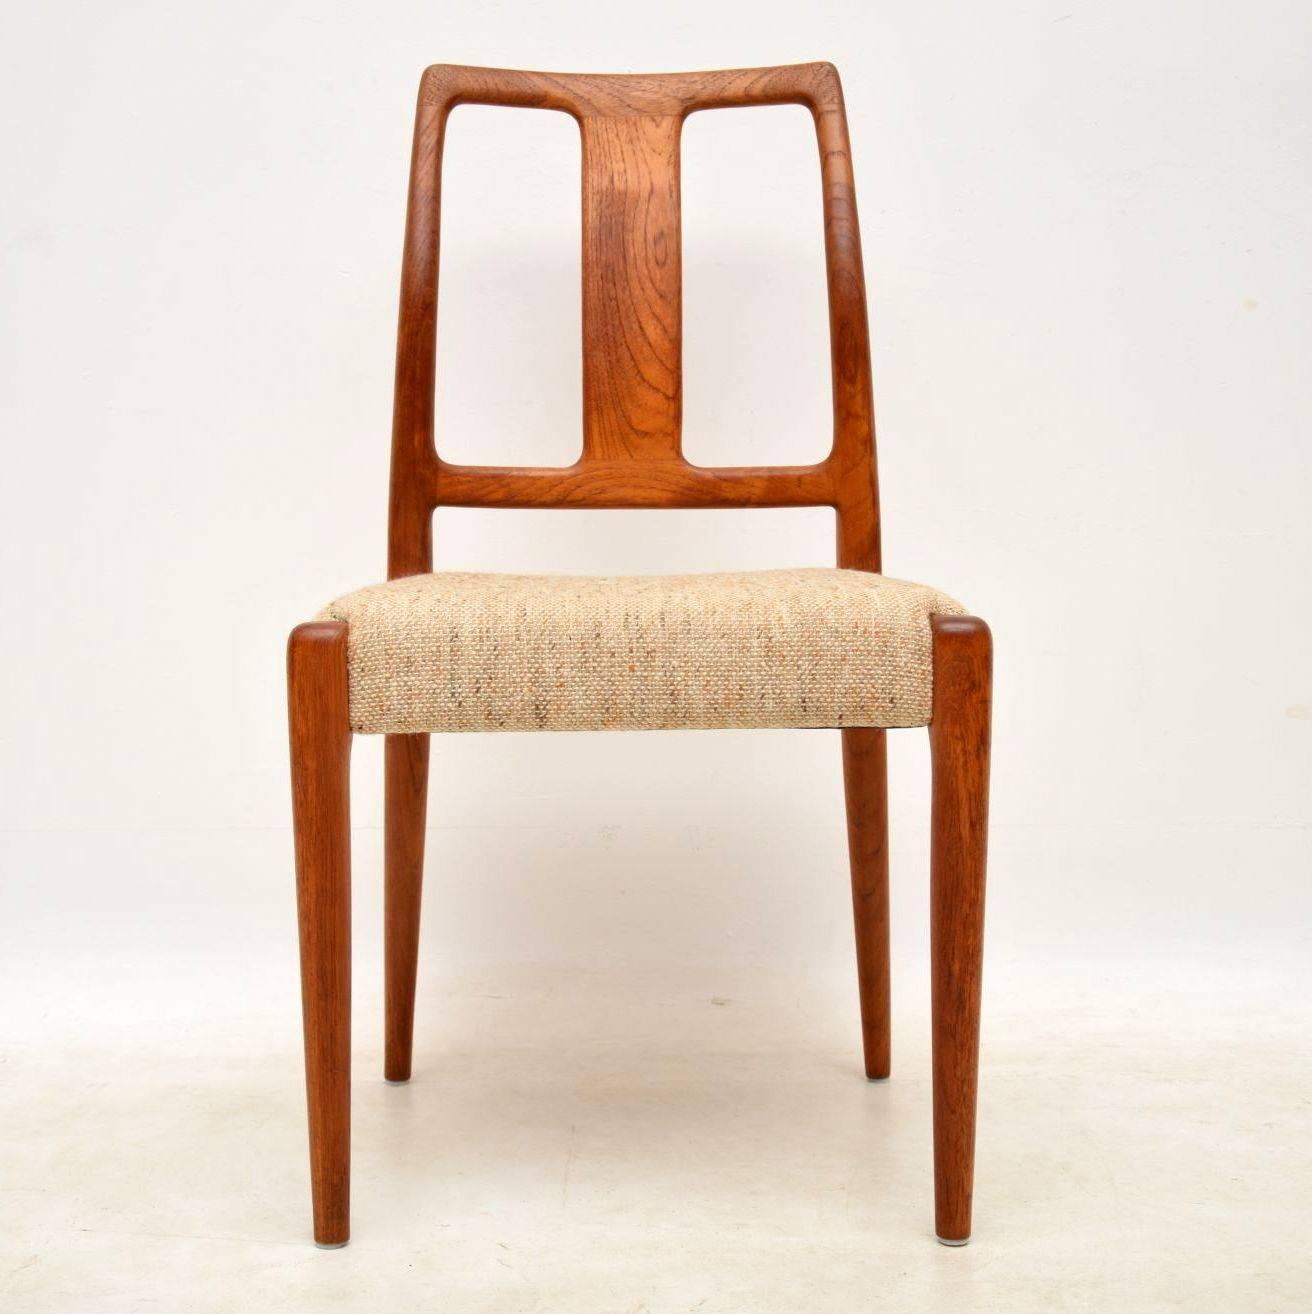 A stunning set of eight Danish teak vintage dining chairs, these date from the 1960s and are in great condition for their age. The original wool upholstery is clean and intact, with only some extremely minor wear. The frames are all clean, sturdy